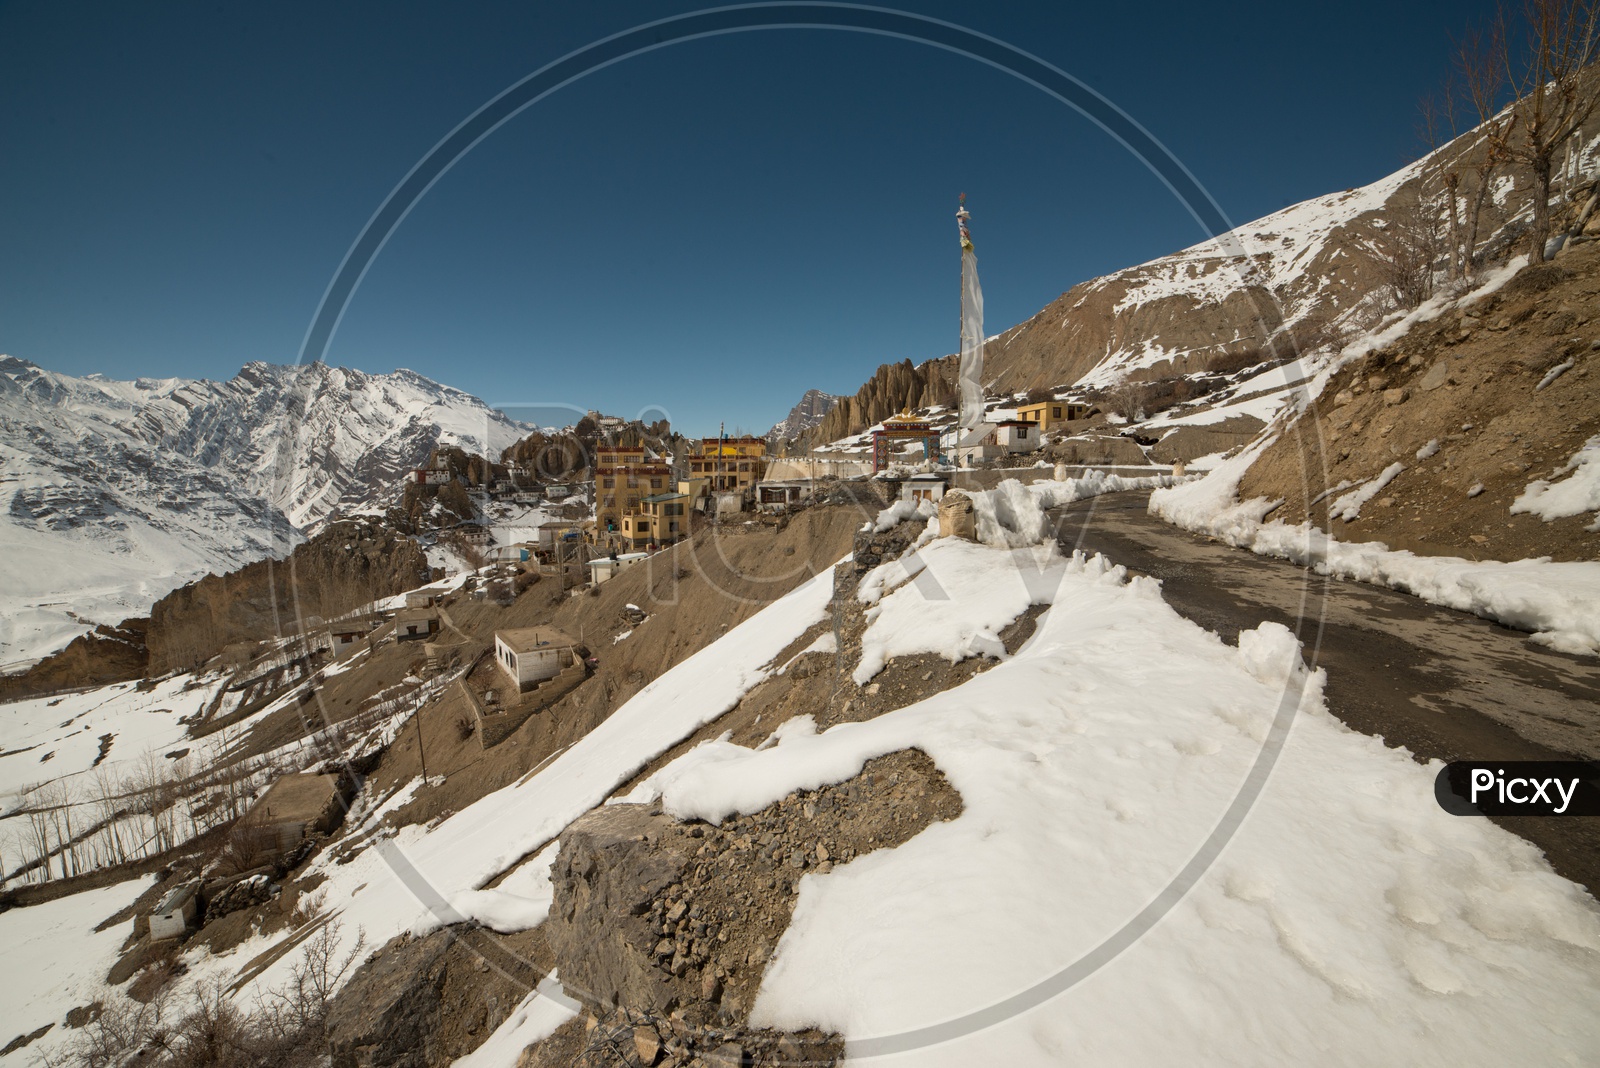 Spiti Village Houses on Mountain Covered in Snow in Winters